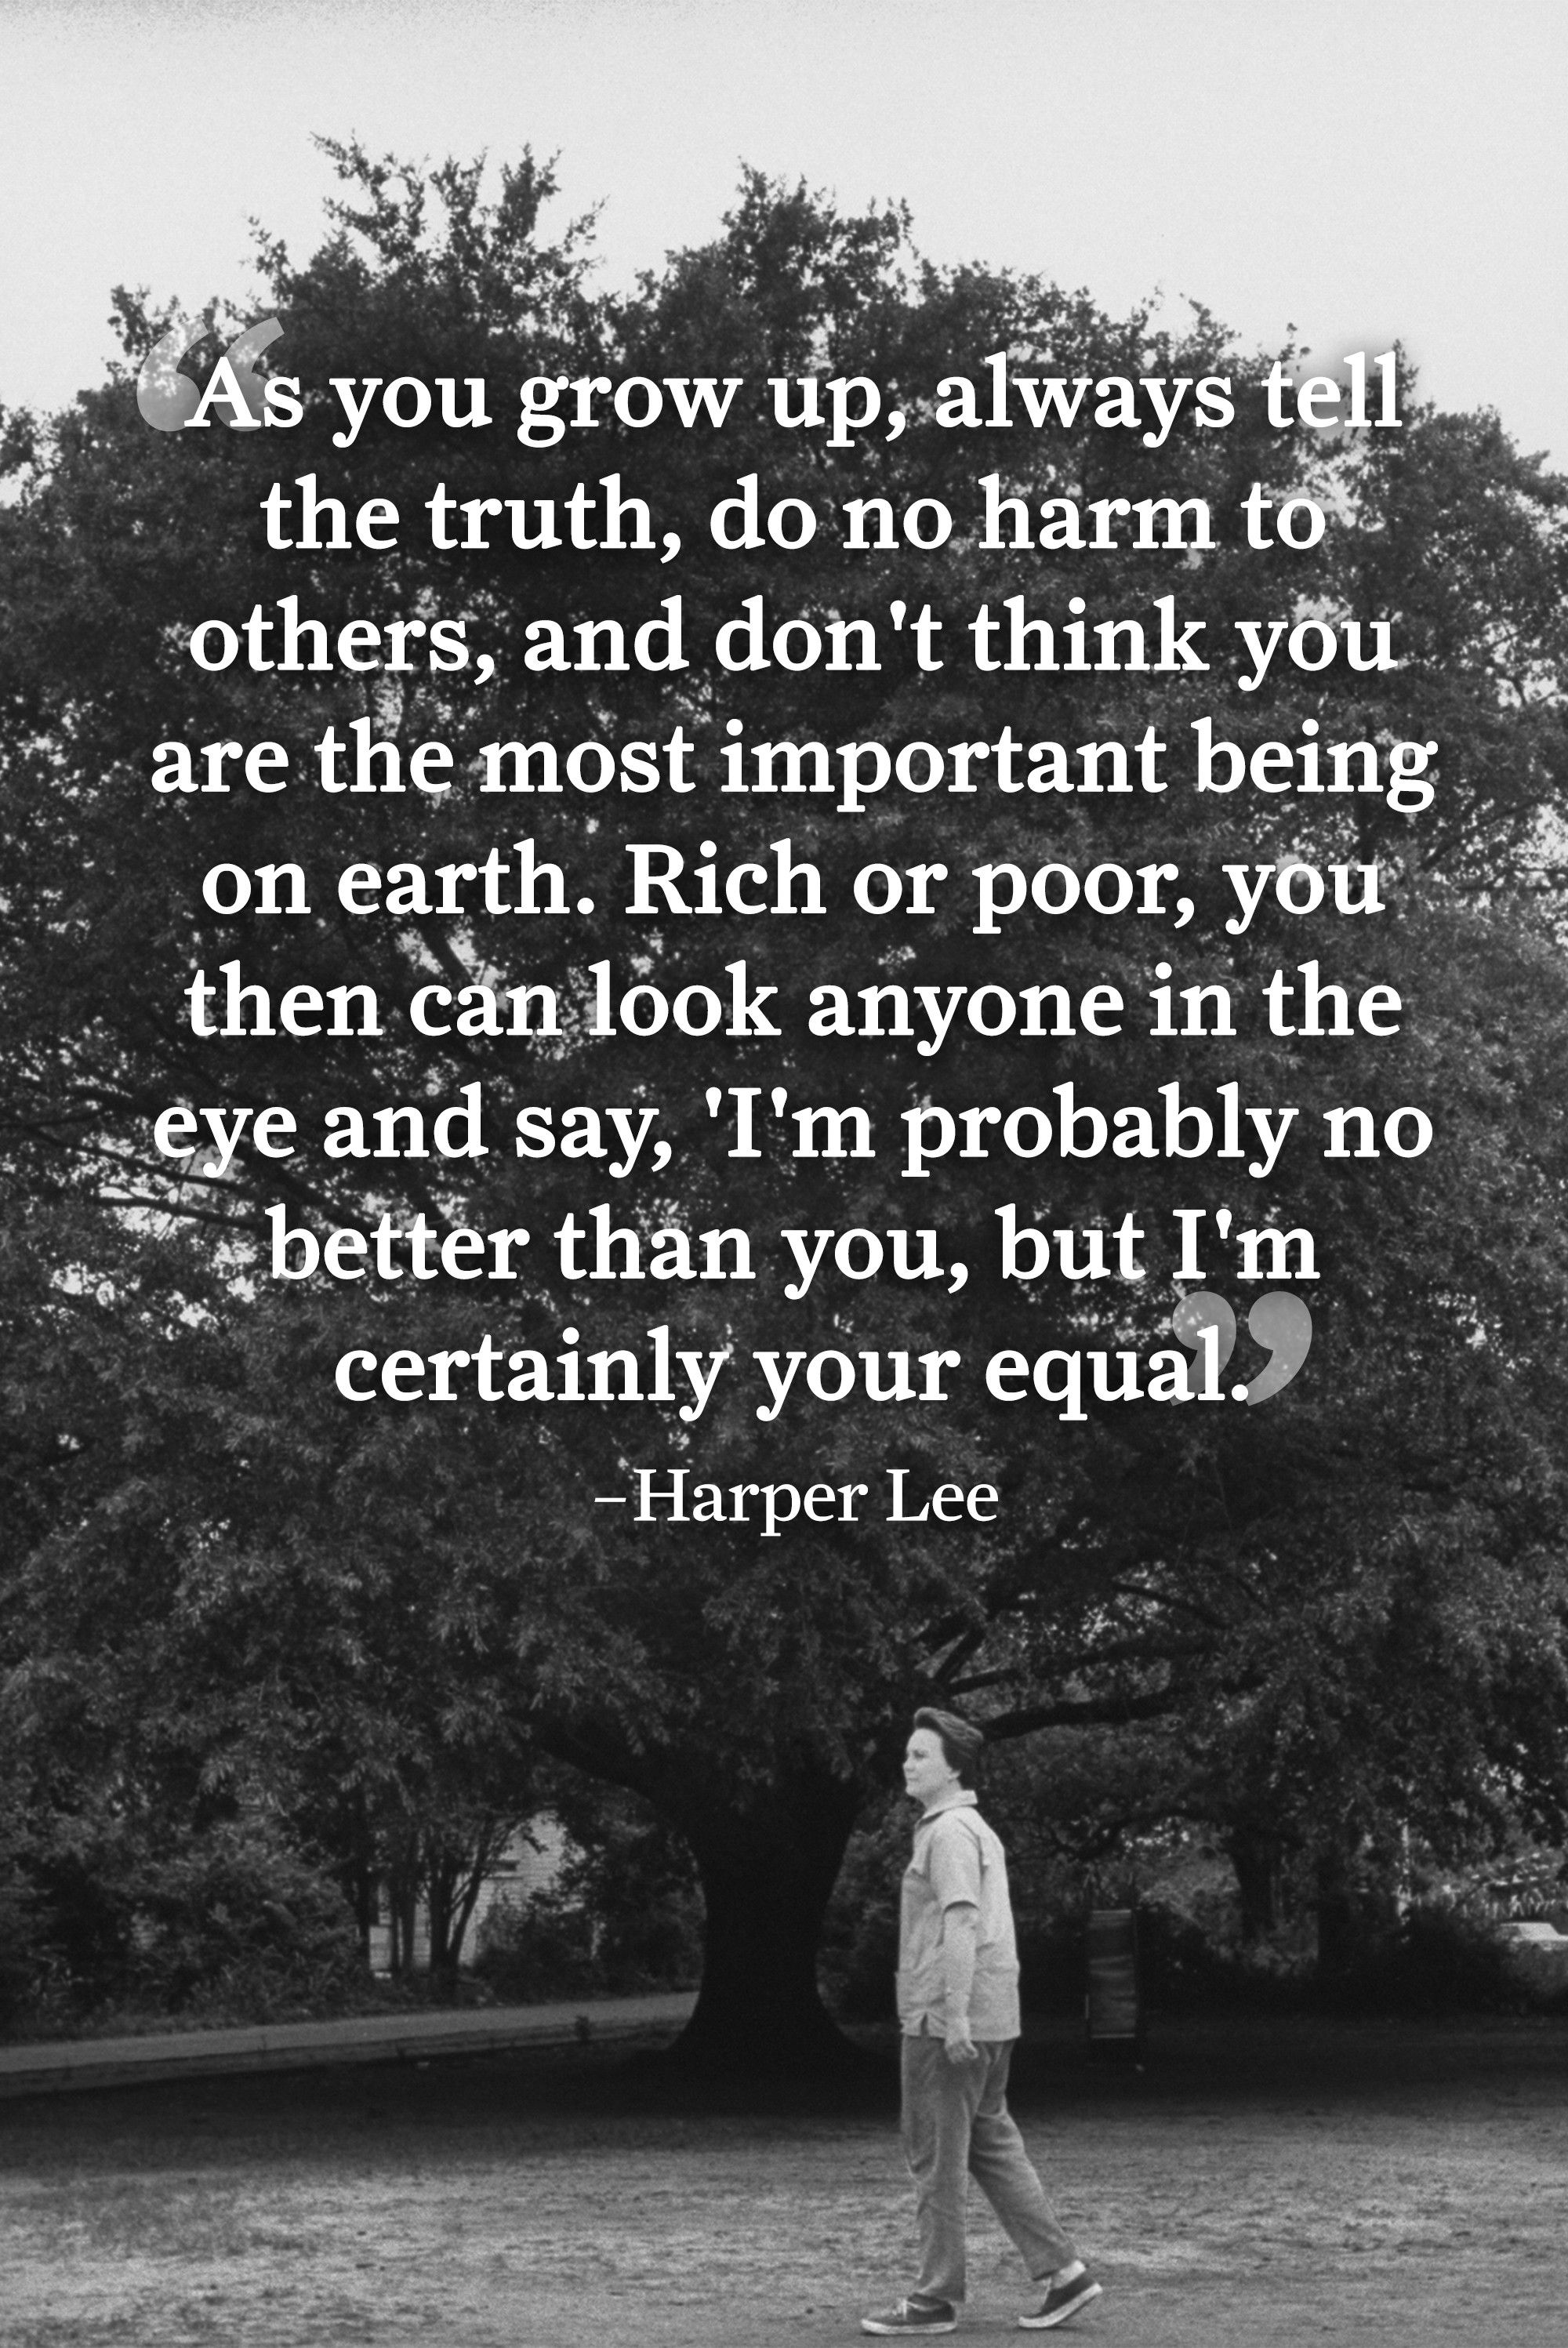 quotes from to kill a mockingbird about prejudice